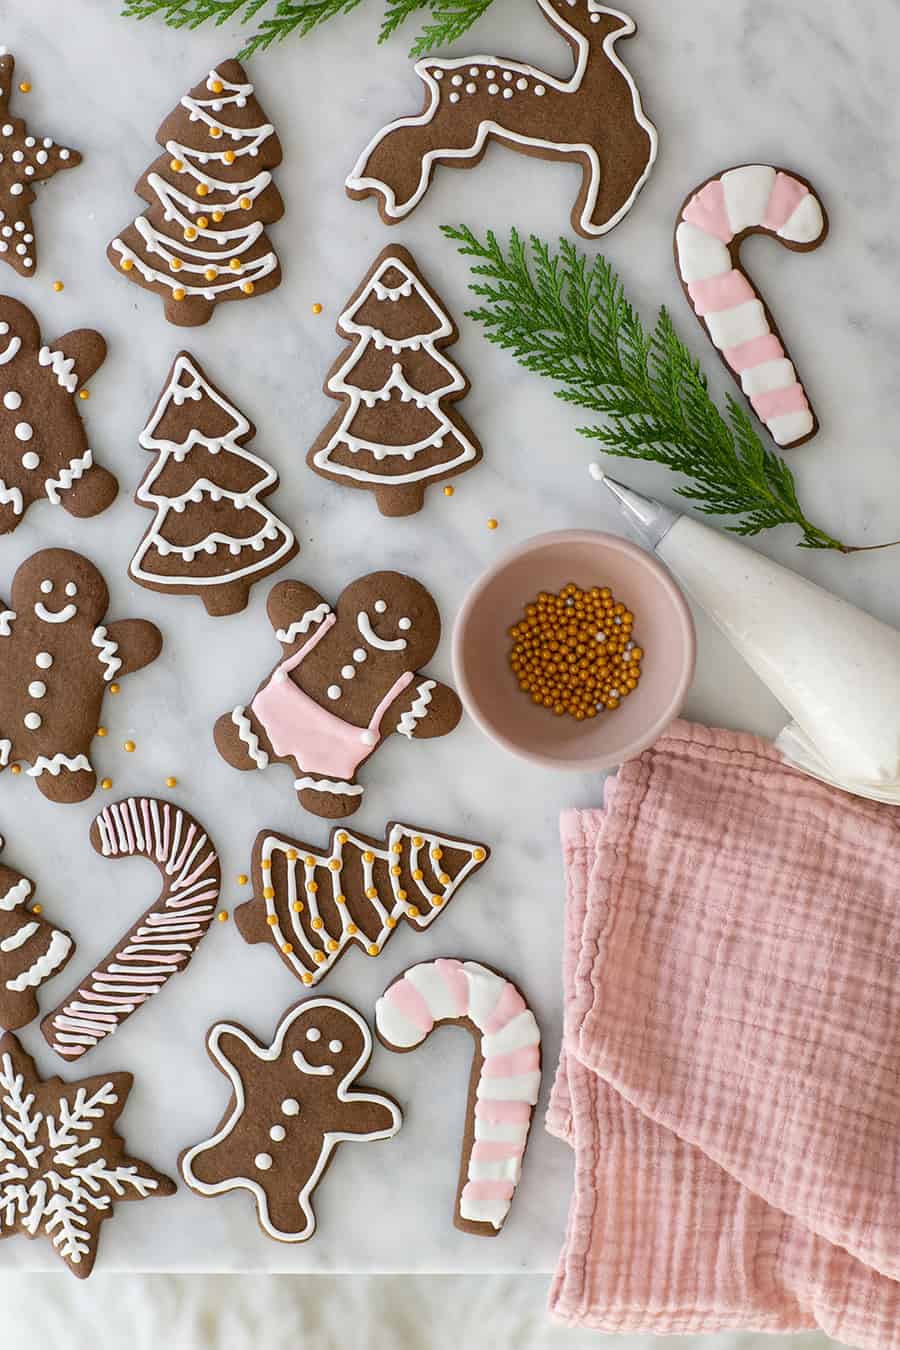 gingerbread man cookies with royal icing